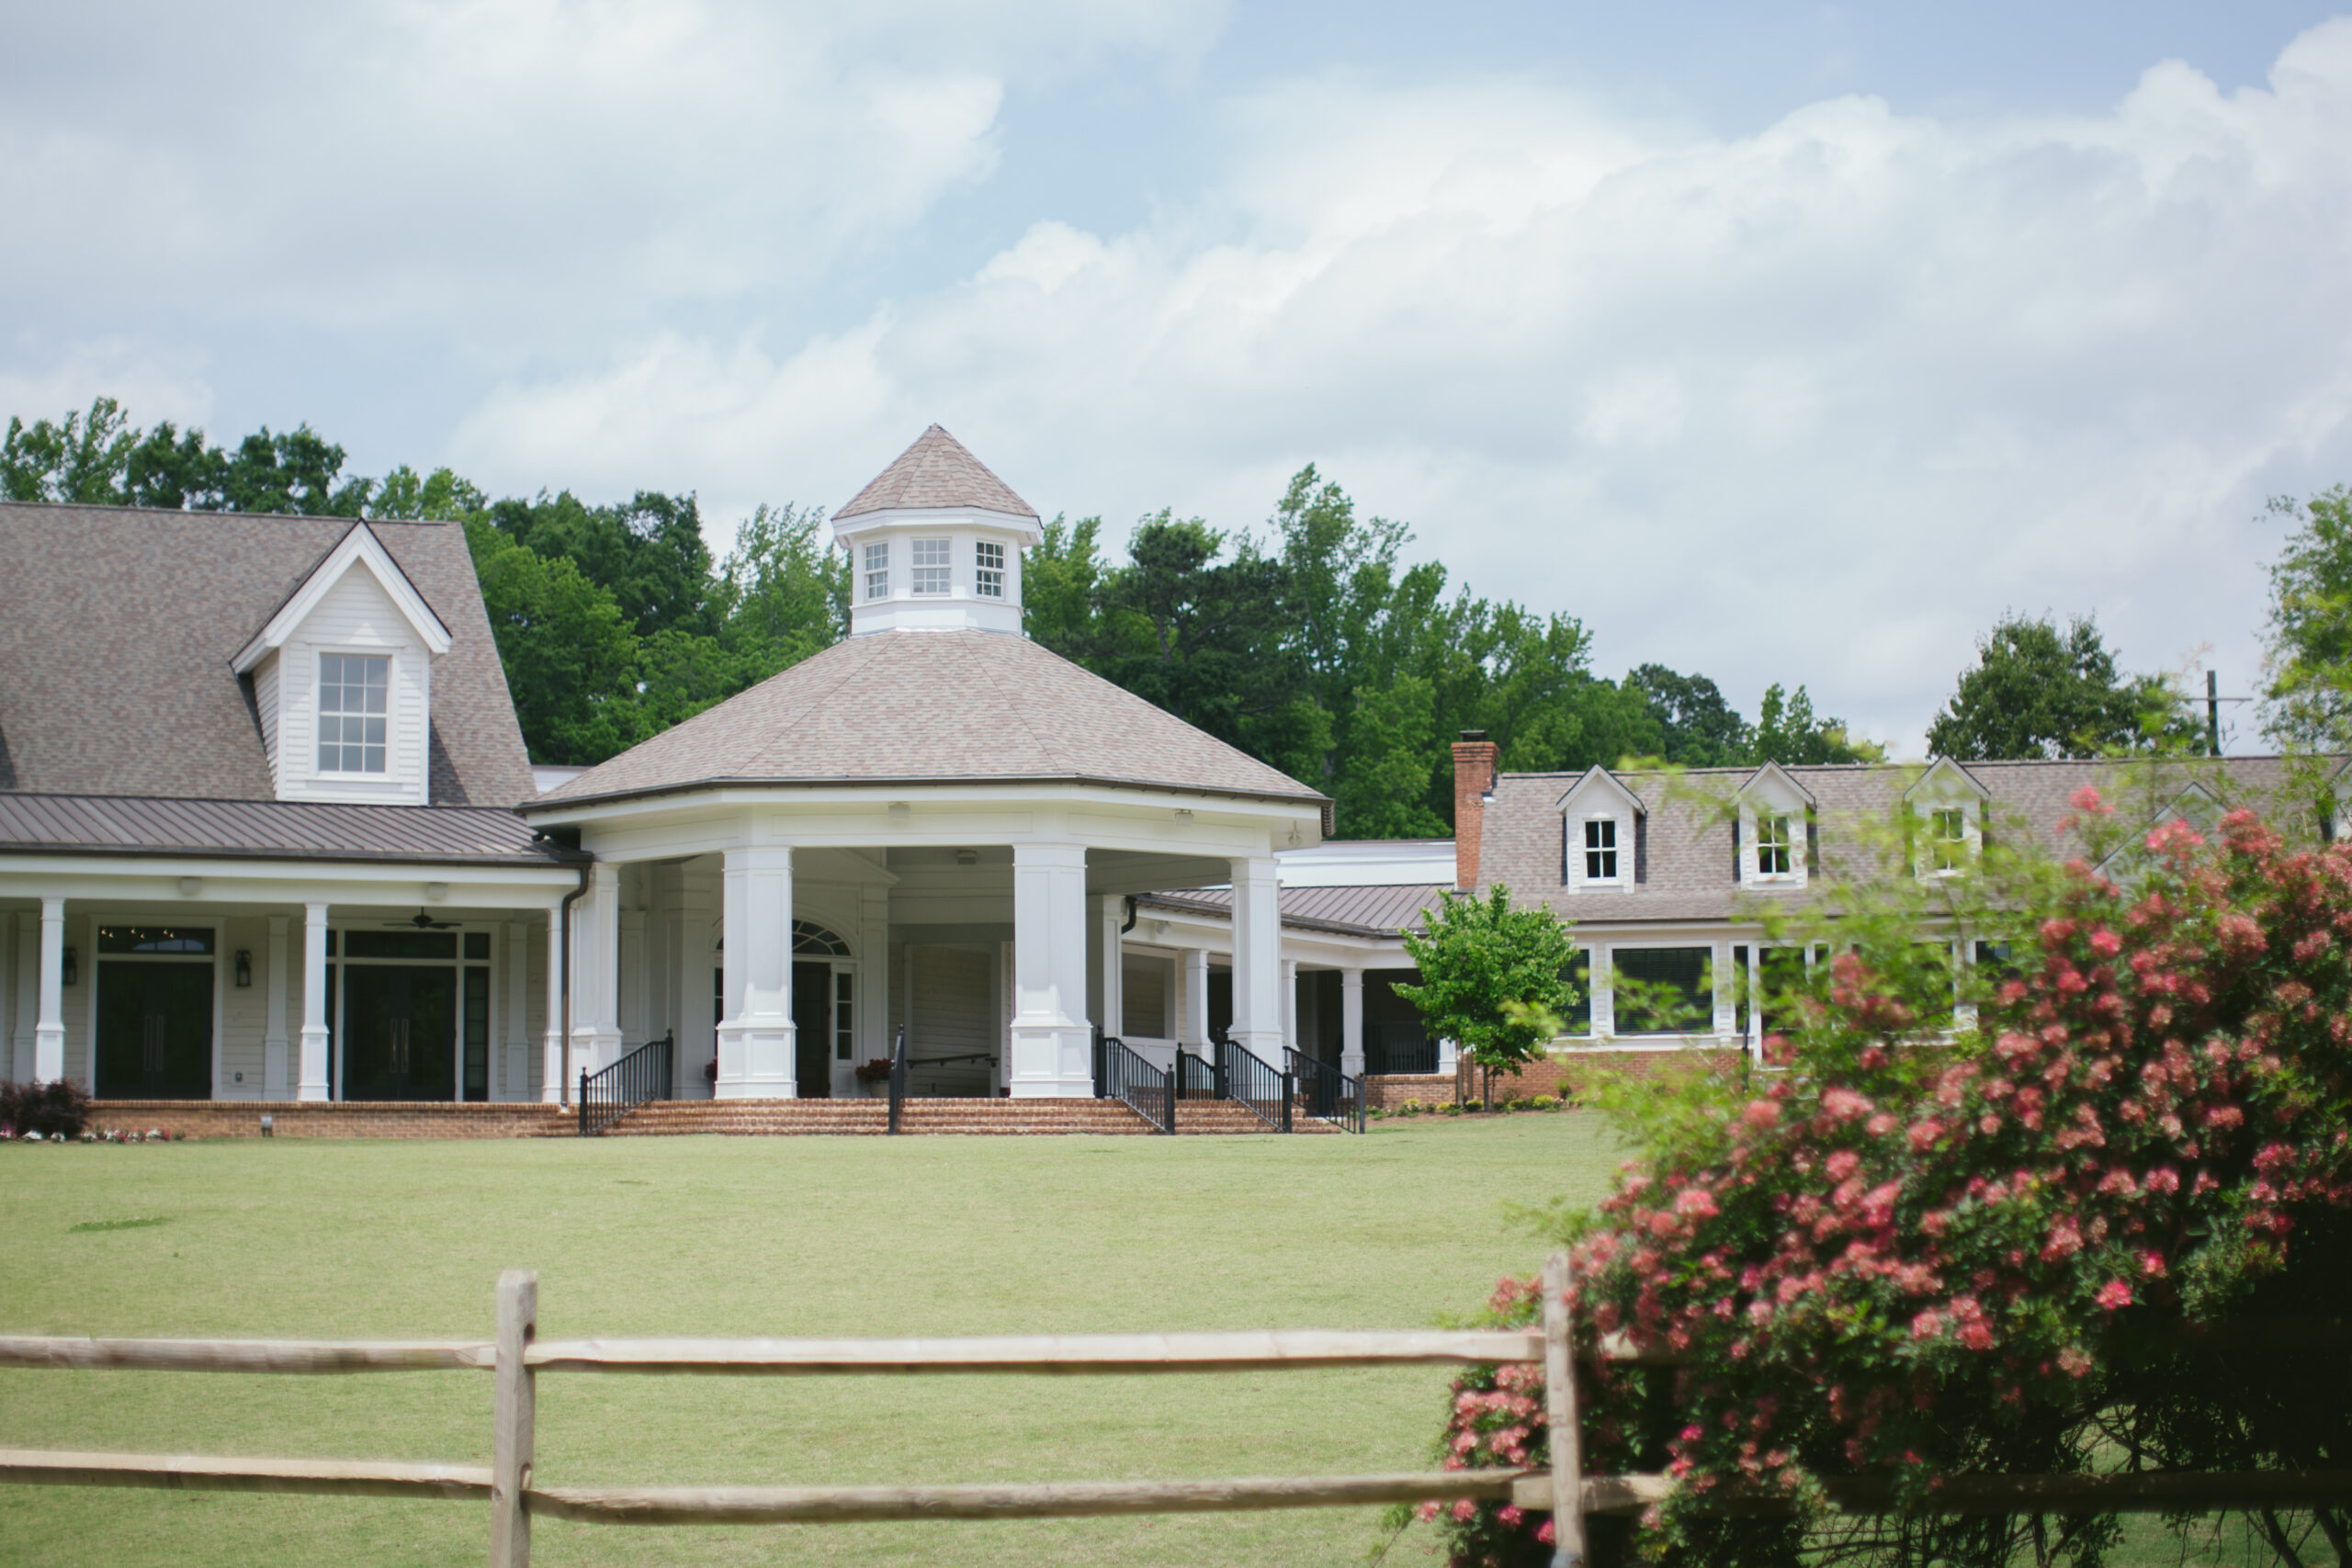 Looking for the perfect staycation/ day trip in the North Georgia area? CLICK HERE to see why you need to check out the Barnsley Resort ASAP this year especially during the holiday season!